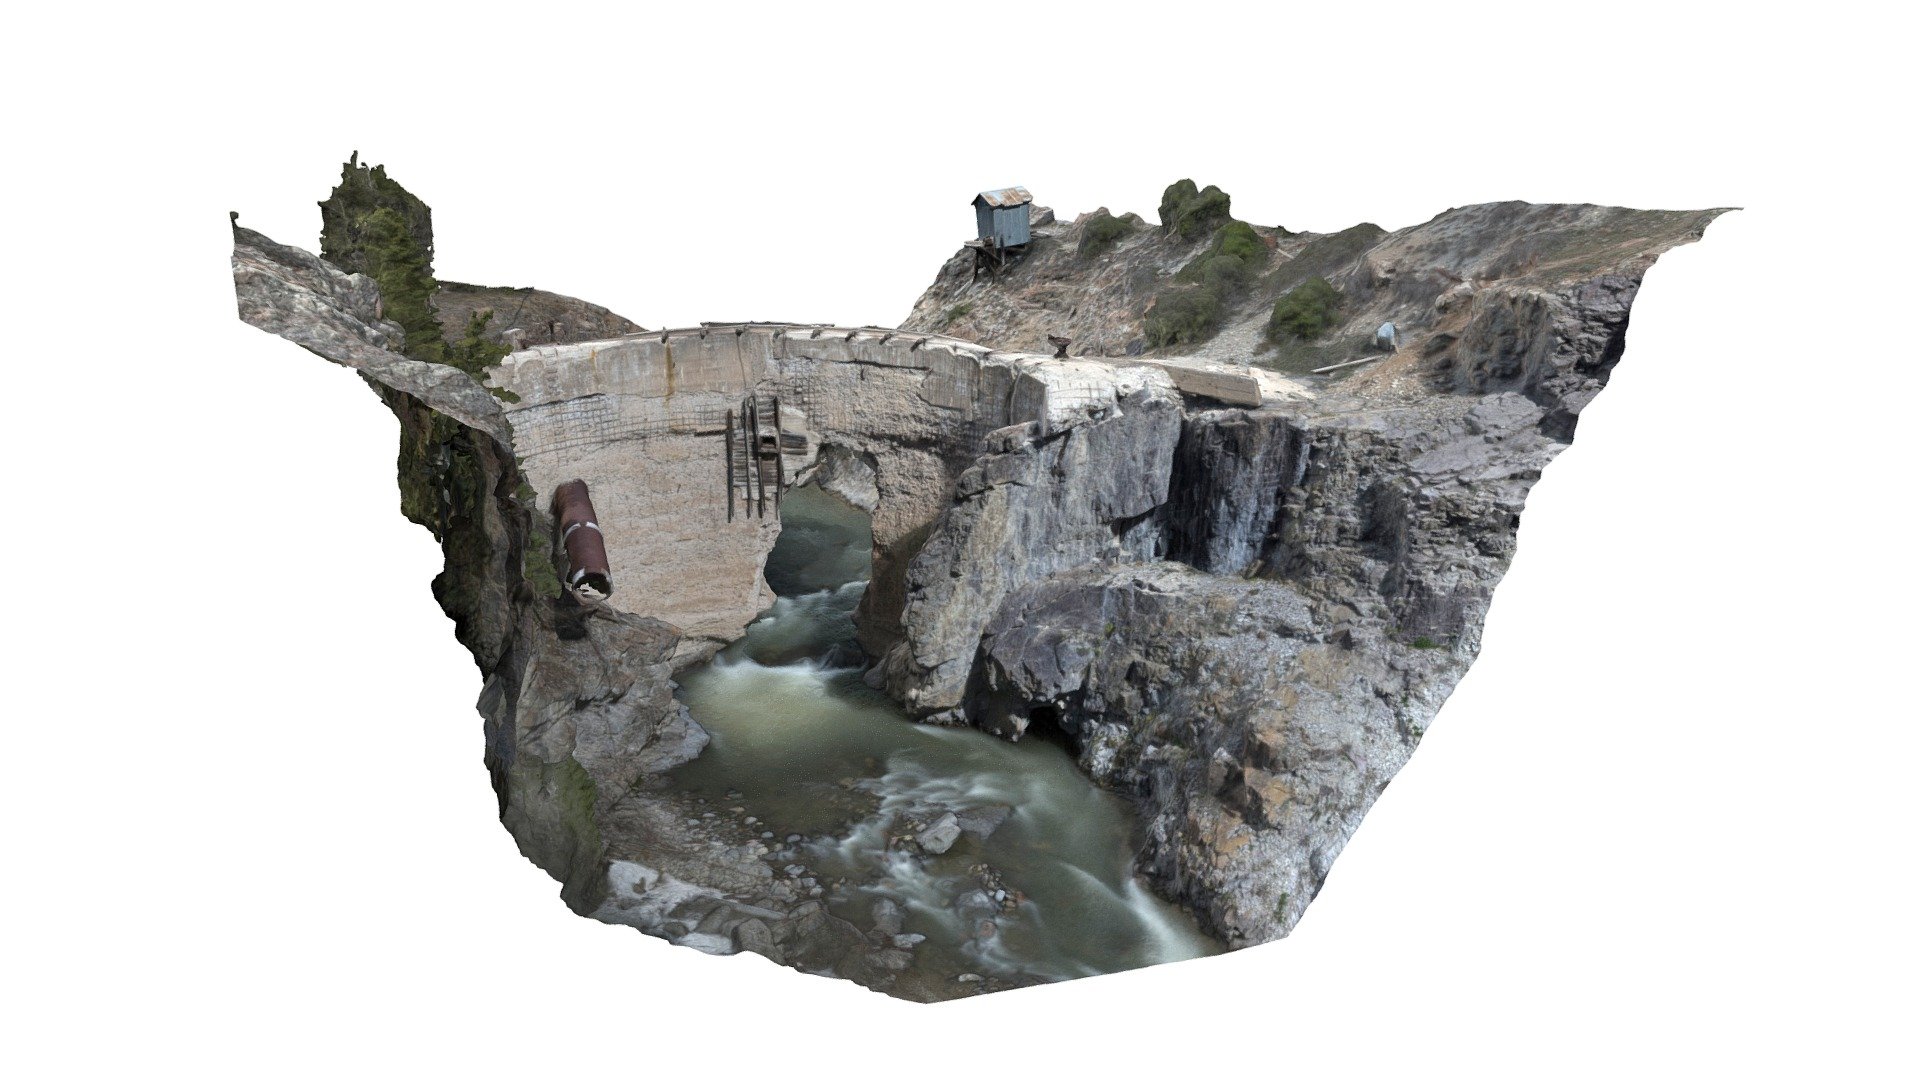 ute ulay dam - download free 3d model blm national operations center geospatial imaging oc534 d59d25a mining complex located along alpine loop scenic byway just south lake city colorado claims were discovered 1871 one biggest producers gold silver san juan mountains bureau land management gunnison field office has partnered hinsdale county promote heritage tourism stabilized preserved several structures within listed register historic places 2017 constructed 1926 provide hydropower mill processed ores poured concrete measures 160 feet across reinforced woven rebar water forced into plant flume originating produced power using three turbine wheels used until 1951 collapsed 3D print model - Mito3D